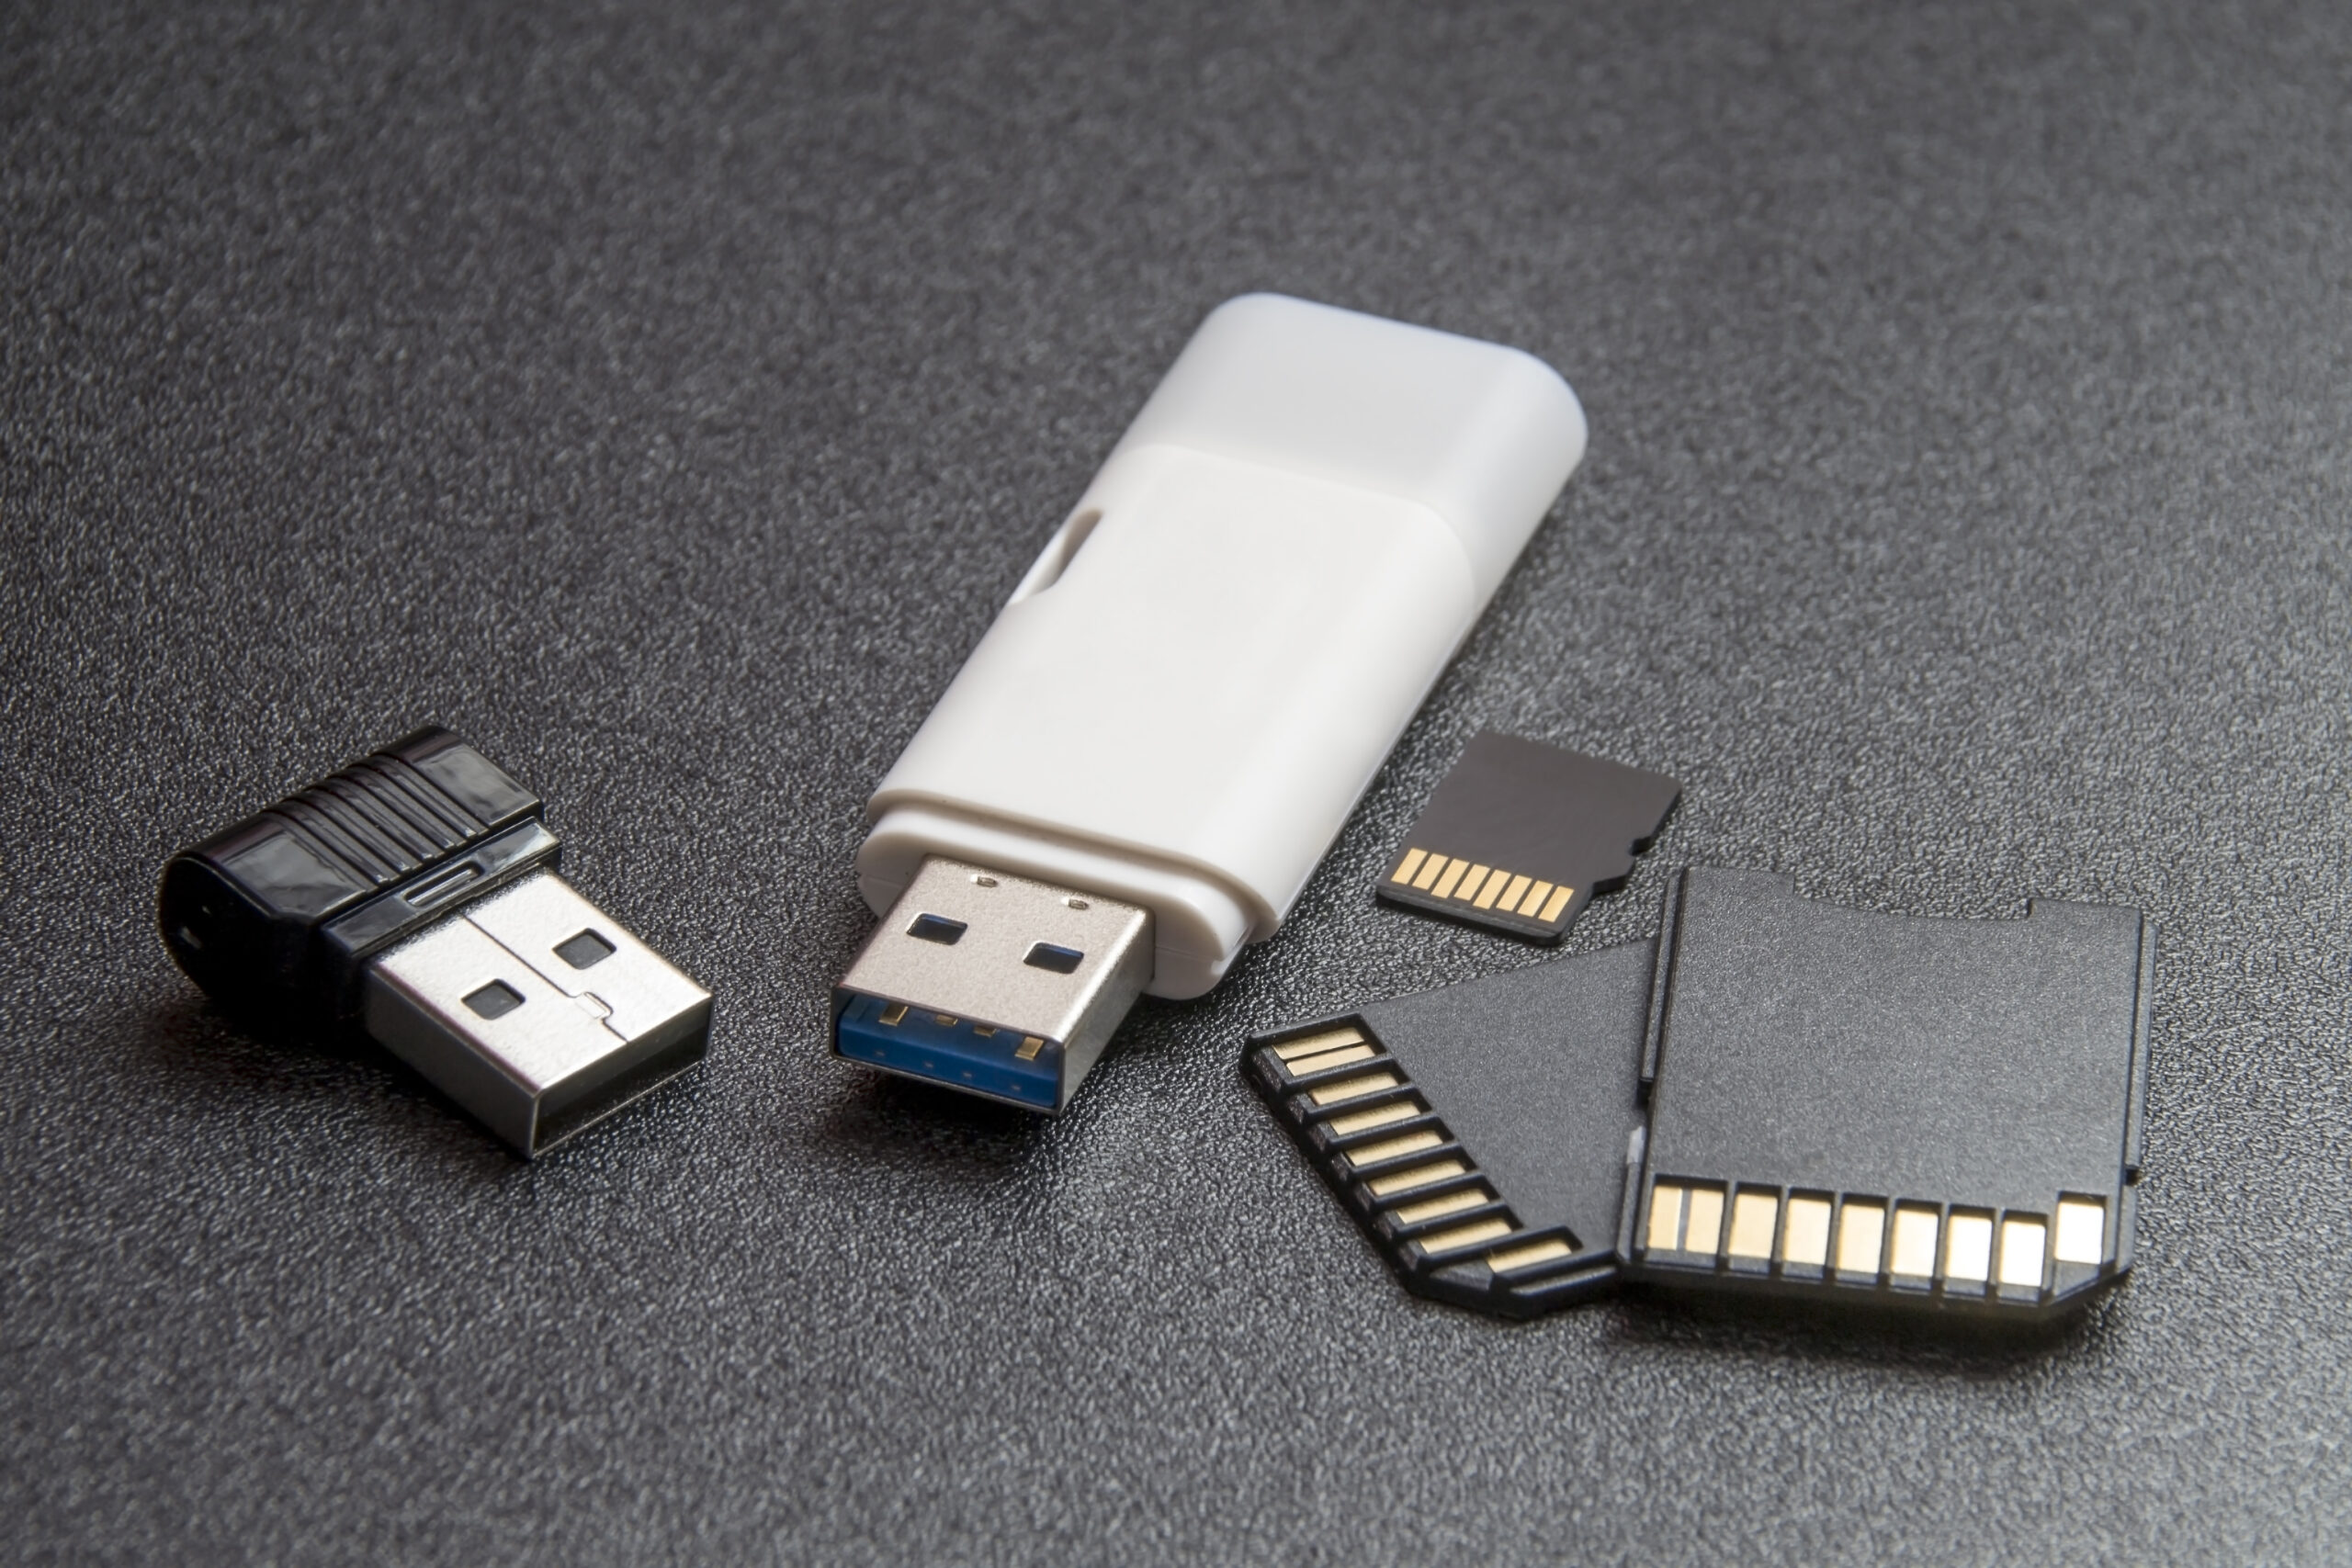 How To Recover Deleted Files From USB